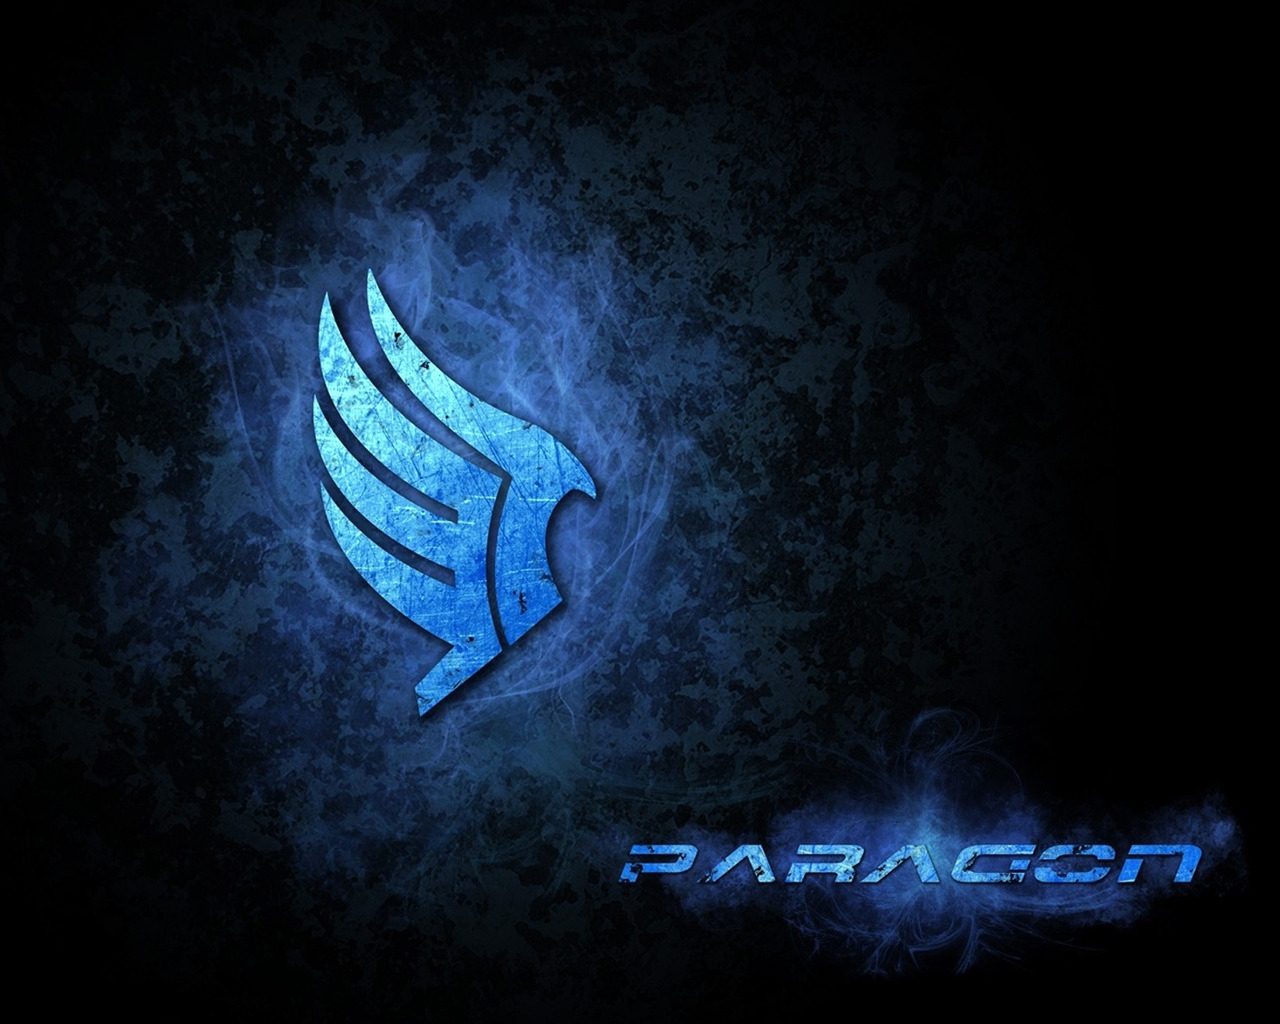 Paragon for 1280 x 1024 resolution